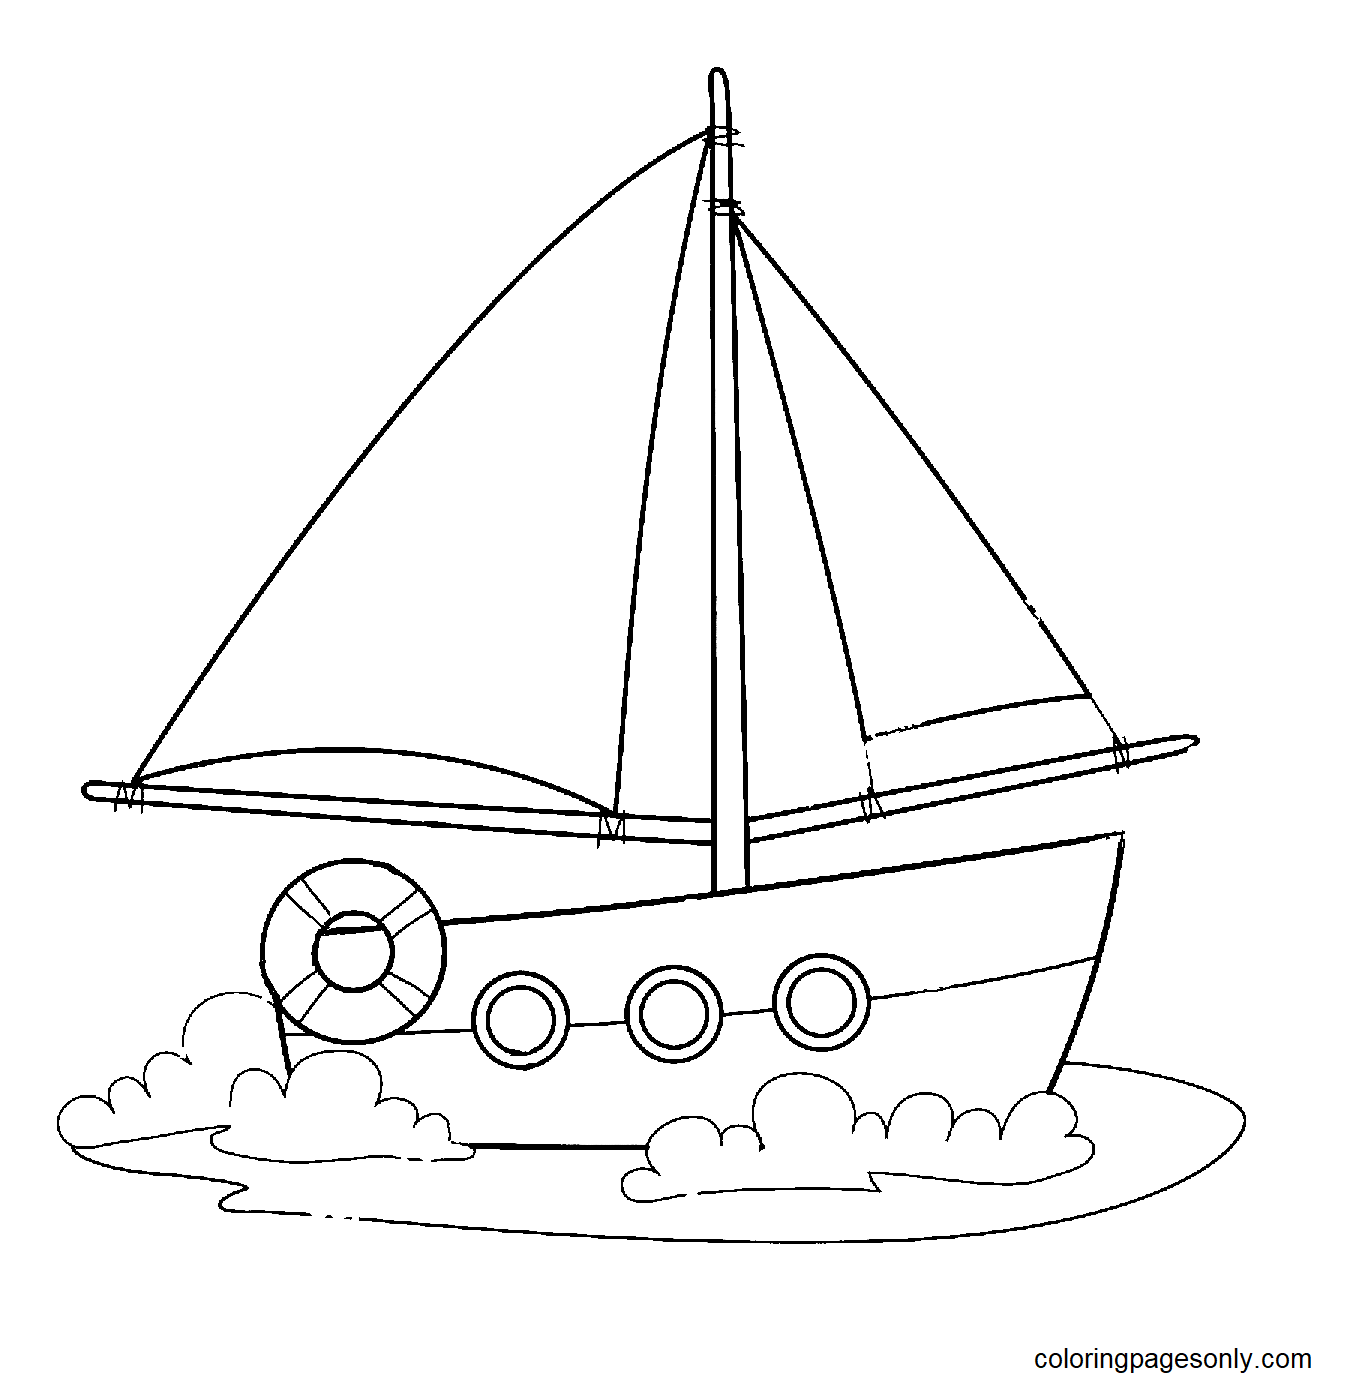 Sailing Vessel Coloring Pages